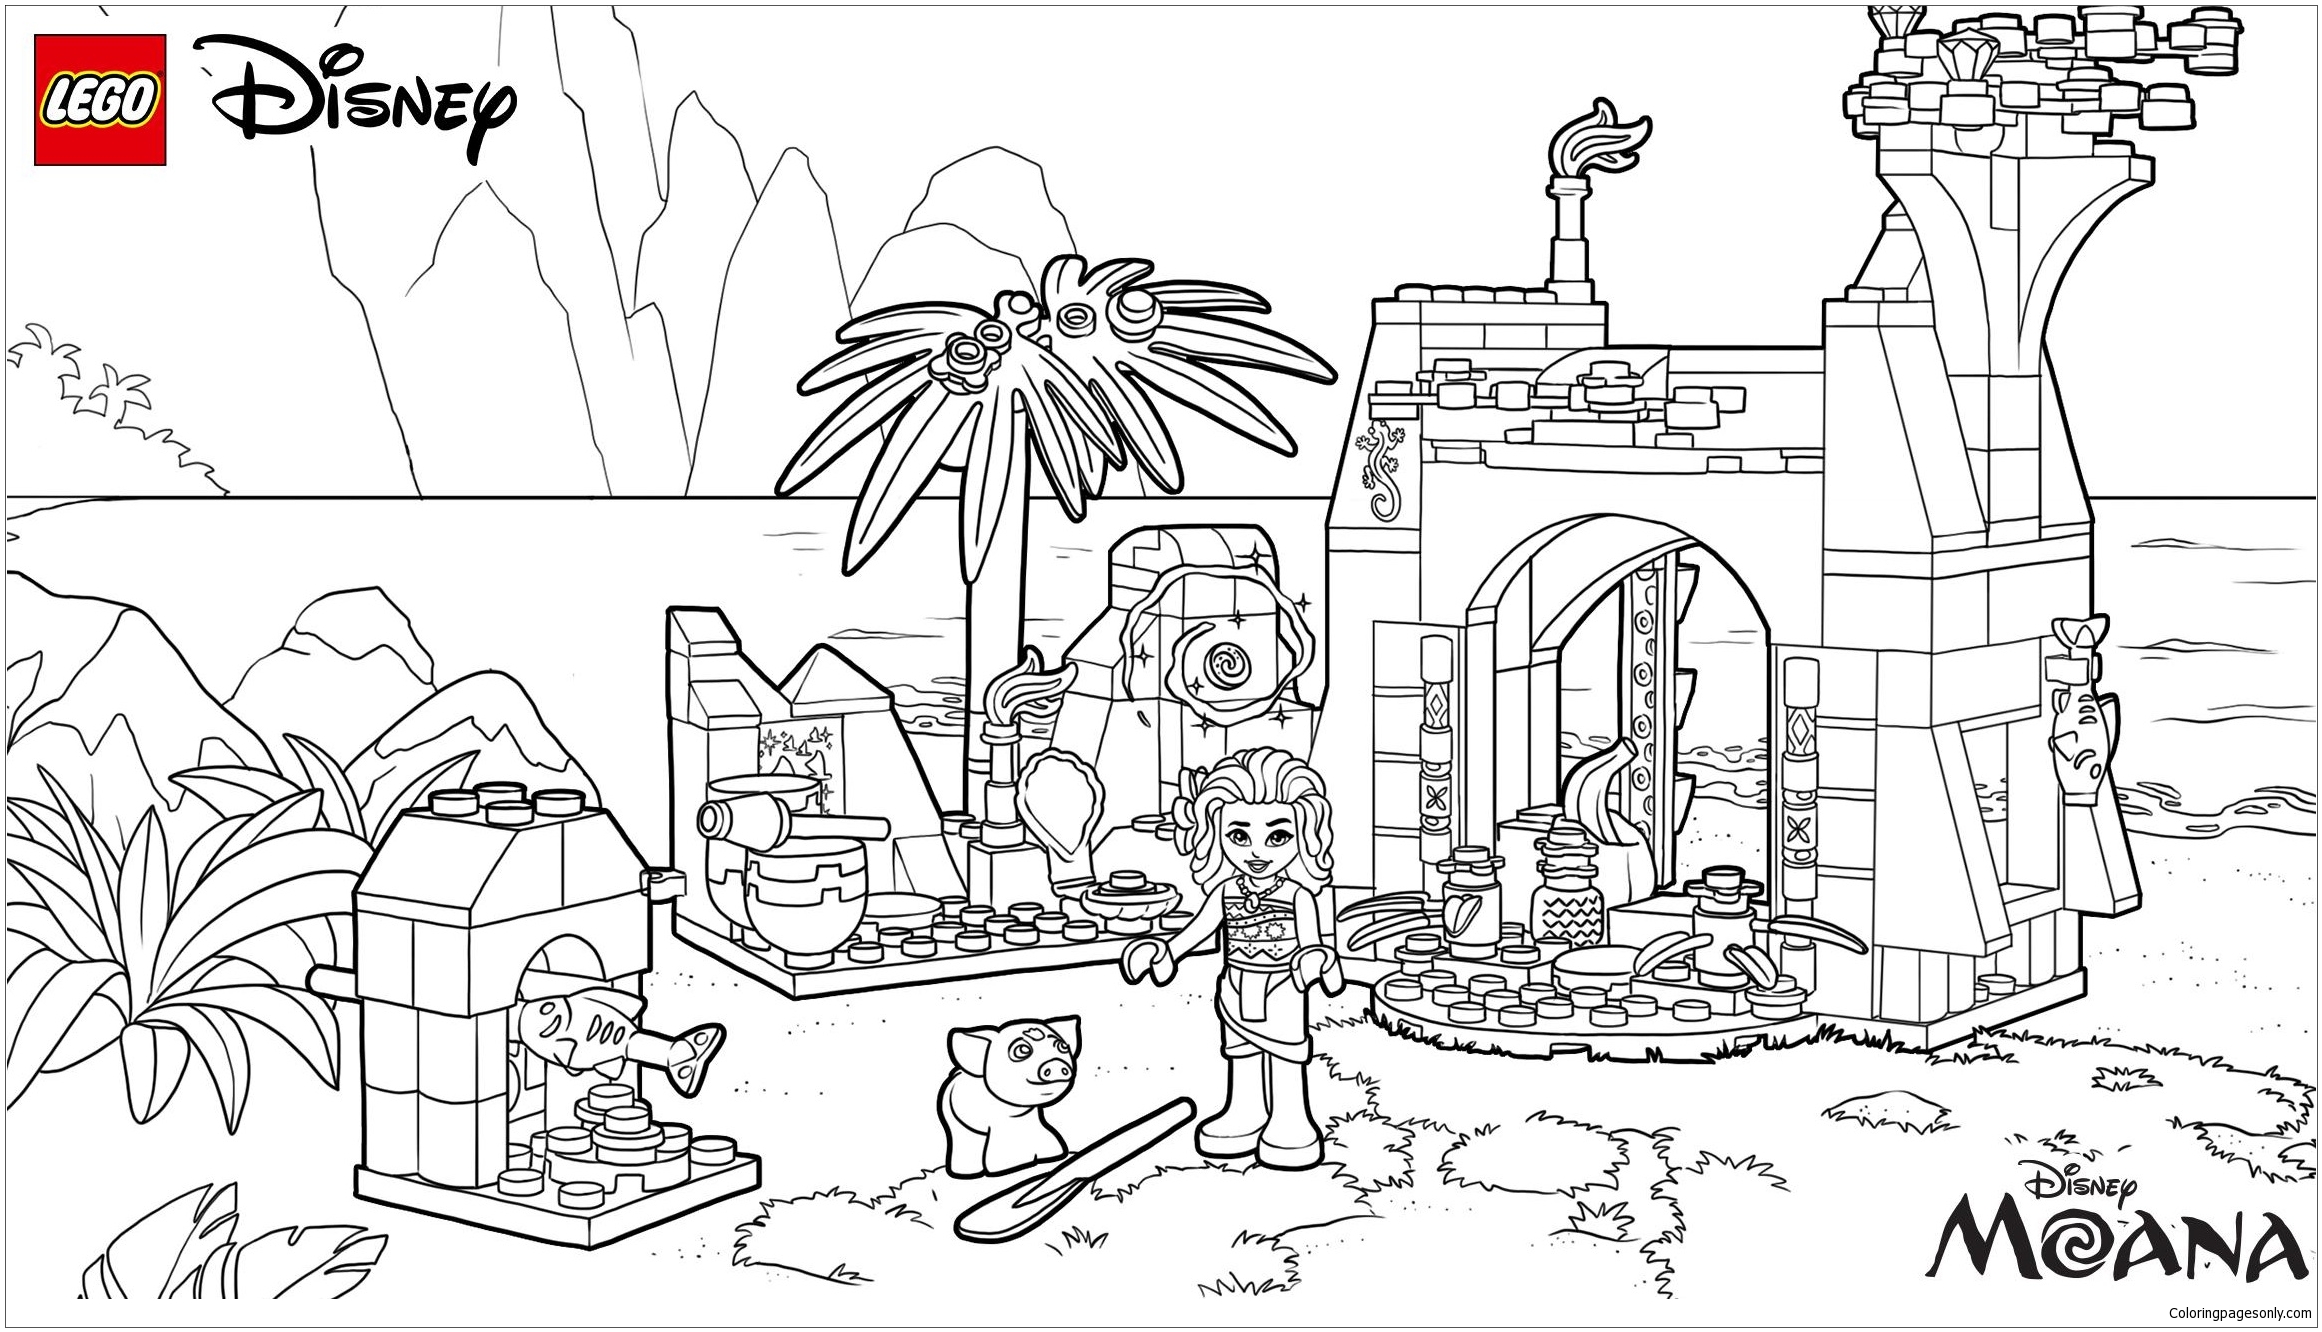 LEGO Disney Moana Island Coloring Pages   Cartoons Coloring Pages ...